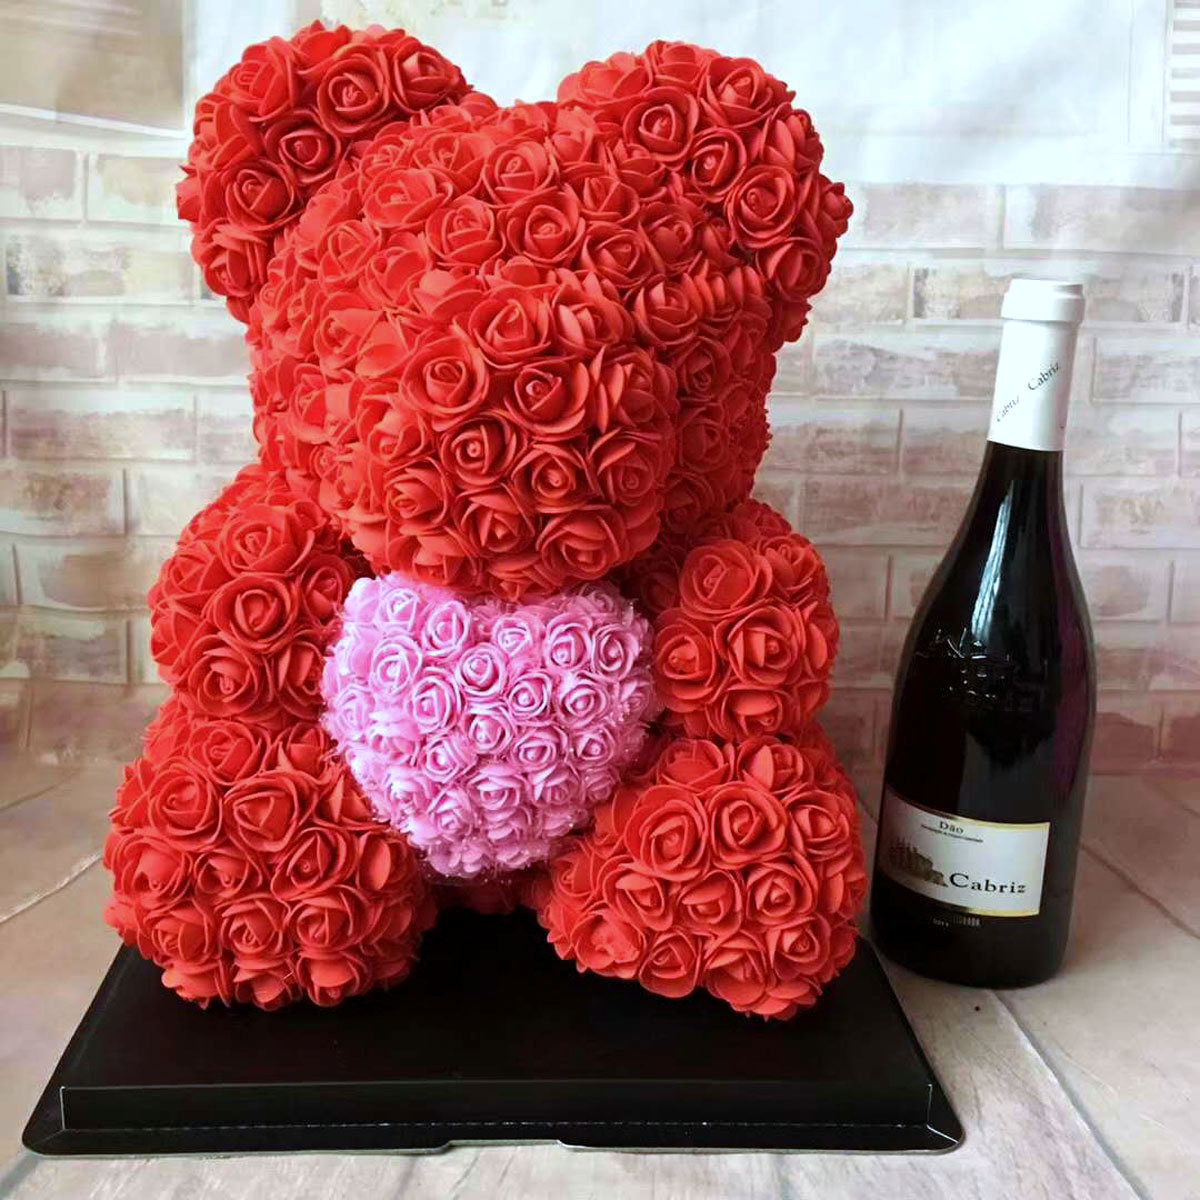 Ideas For Valentine Gift
 9 Wine Valentines Day Gift Ideas for Her